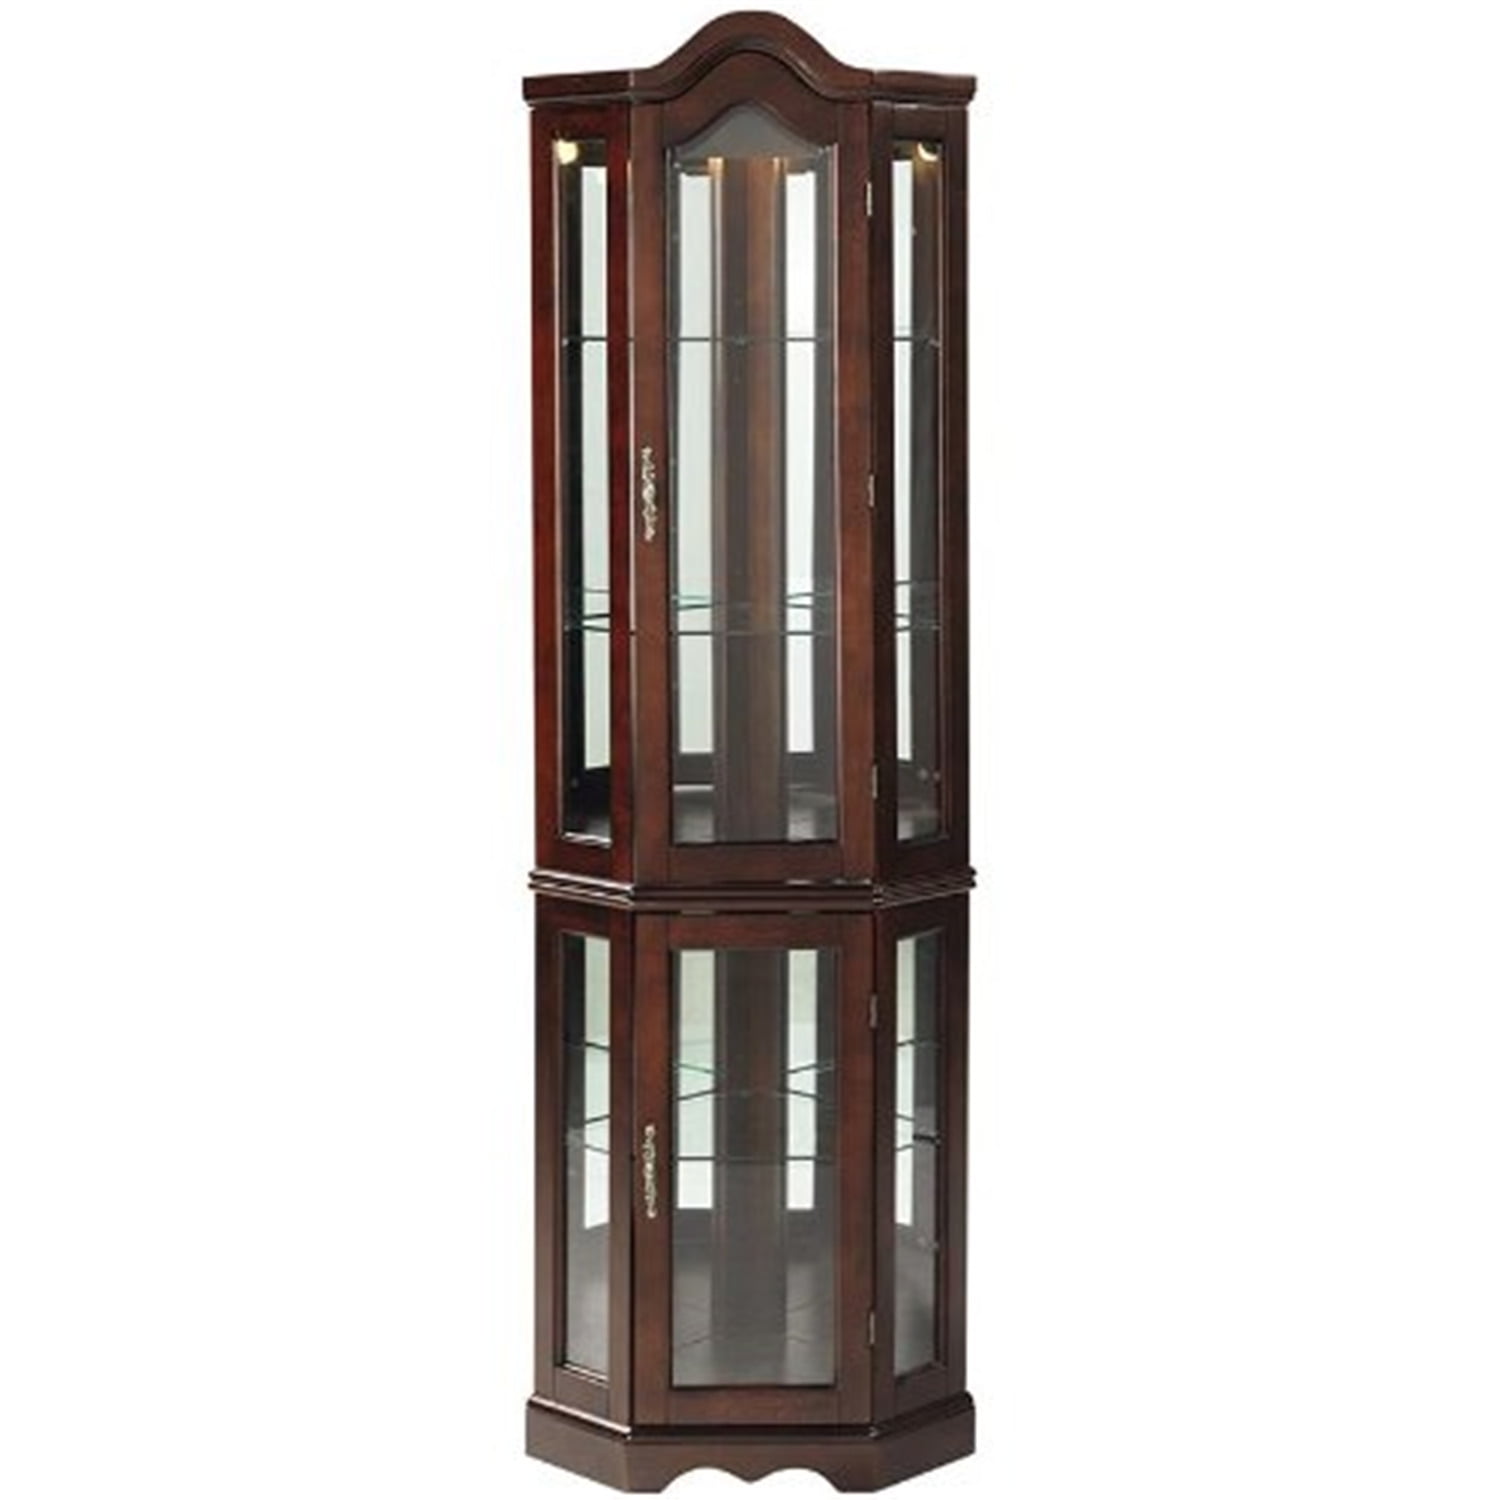 Lighted Corner Curio Cabinet Mahogany, Lighted Display Cabinet With Glass Doors